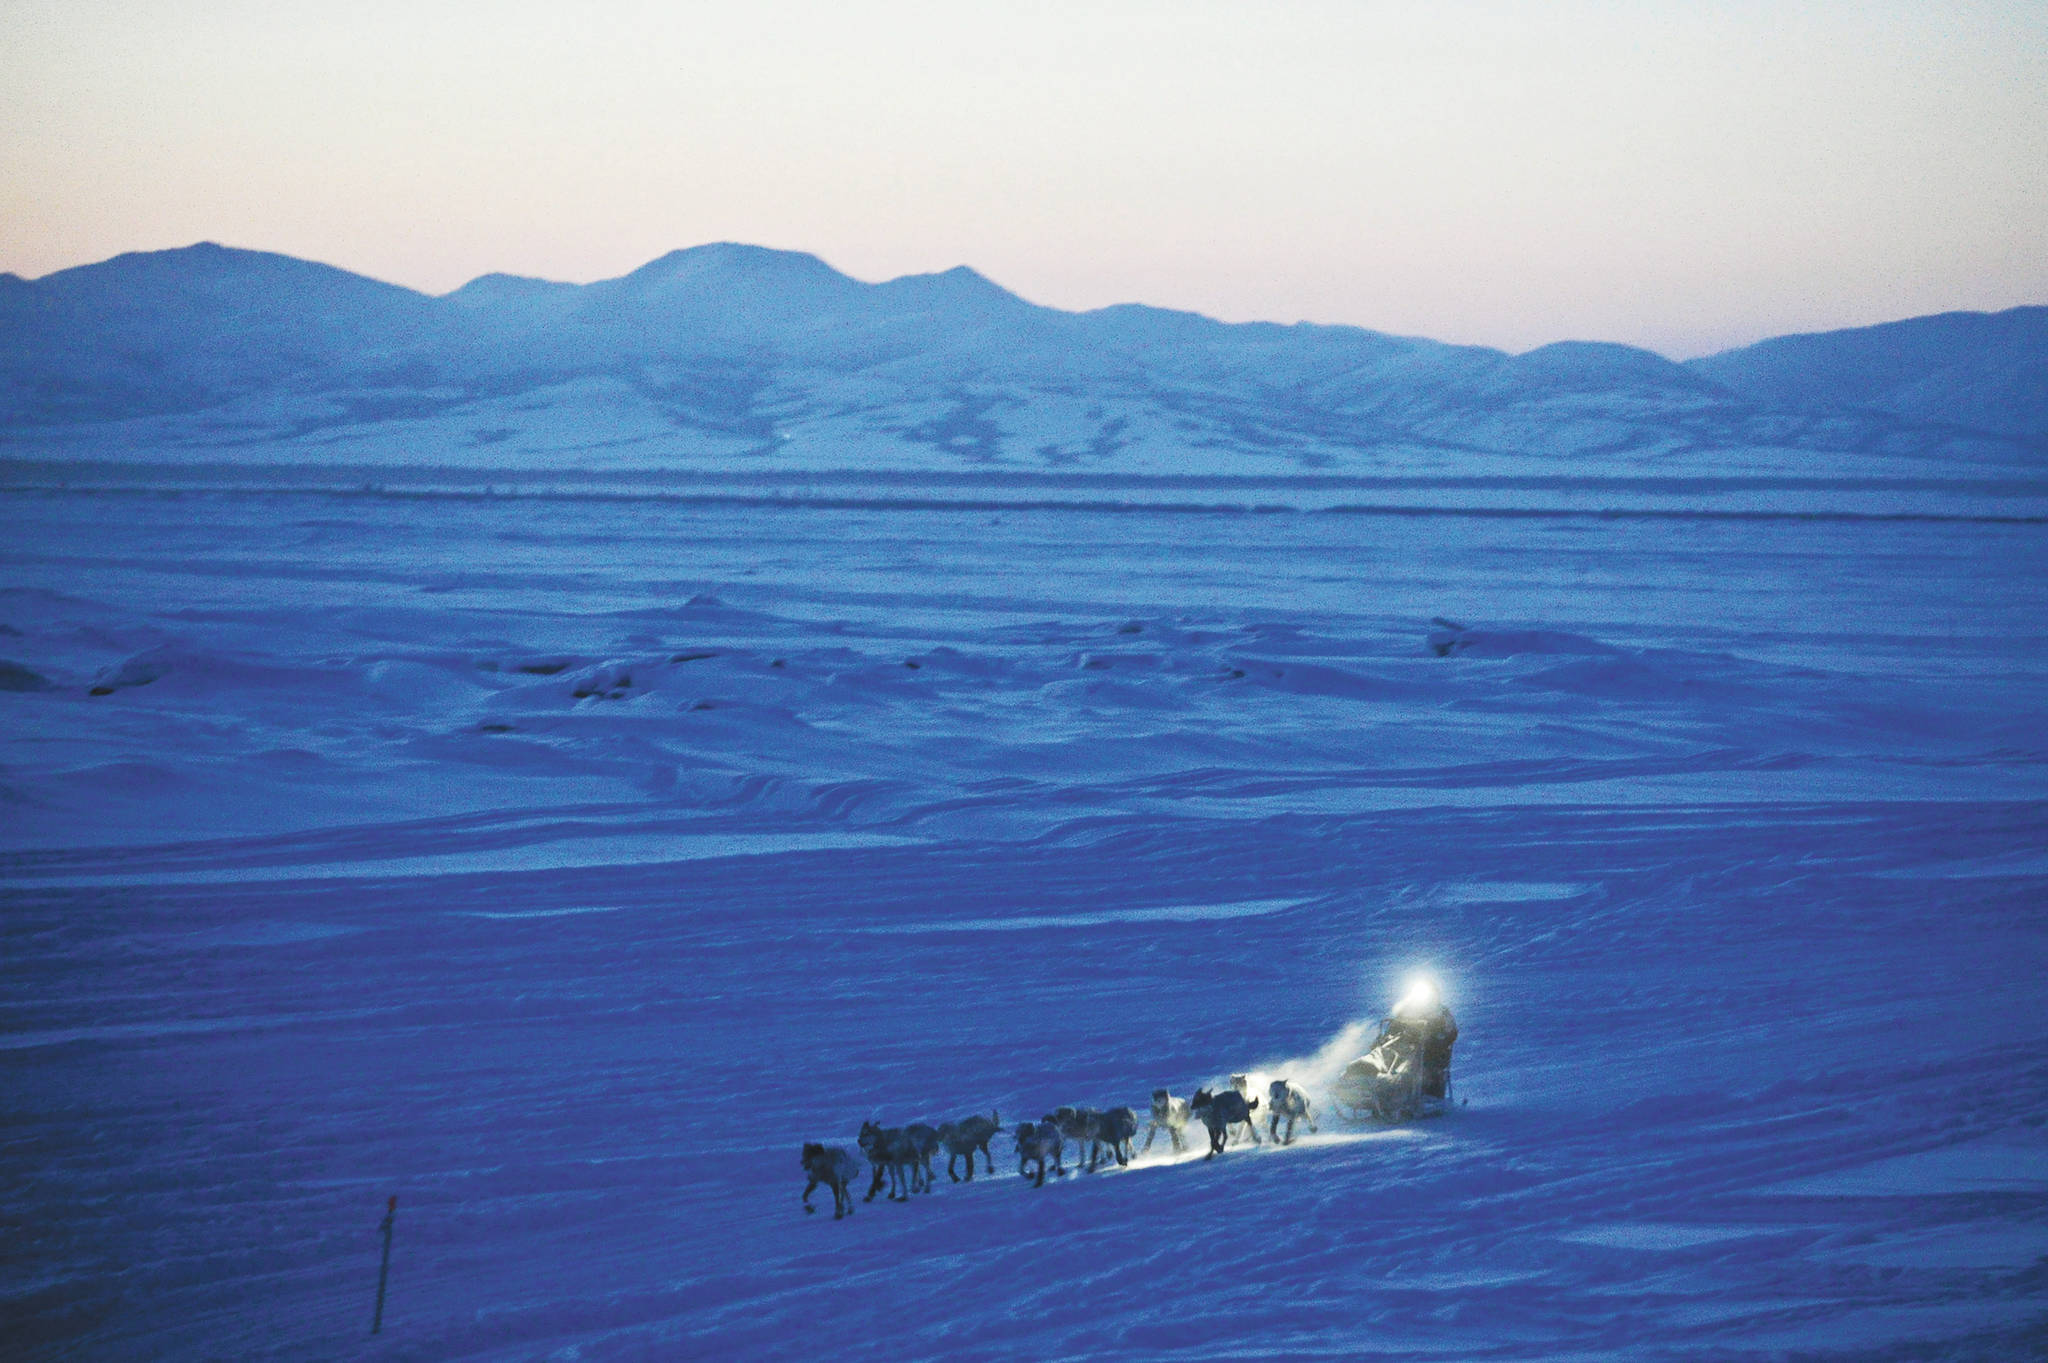 In this March 11, 2012, file photo, Dallas Seavey pulls in to the checkpoint in Unalakleet, Alaska, during the Iditarod Trail Sled Dog Race. The world’s most famous sled dog race starts Sunday, March 7, 2021, without its defending champion in a contest that will be as much dominated by unknowns and changes because of the pandemic as mushers are by the Alaska terrain. (Marc Lester/Anchorage Daily News via AP, File)